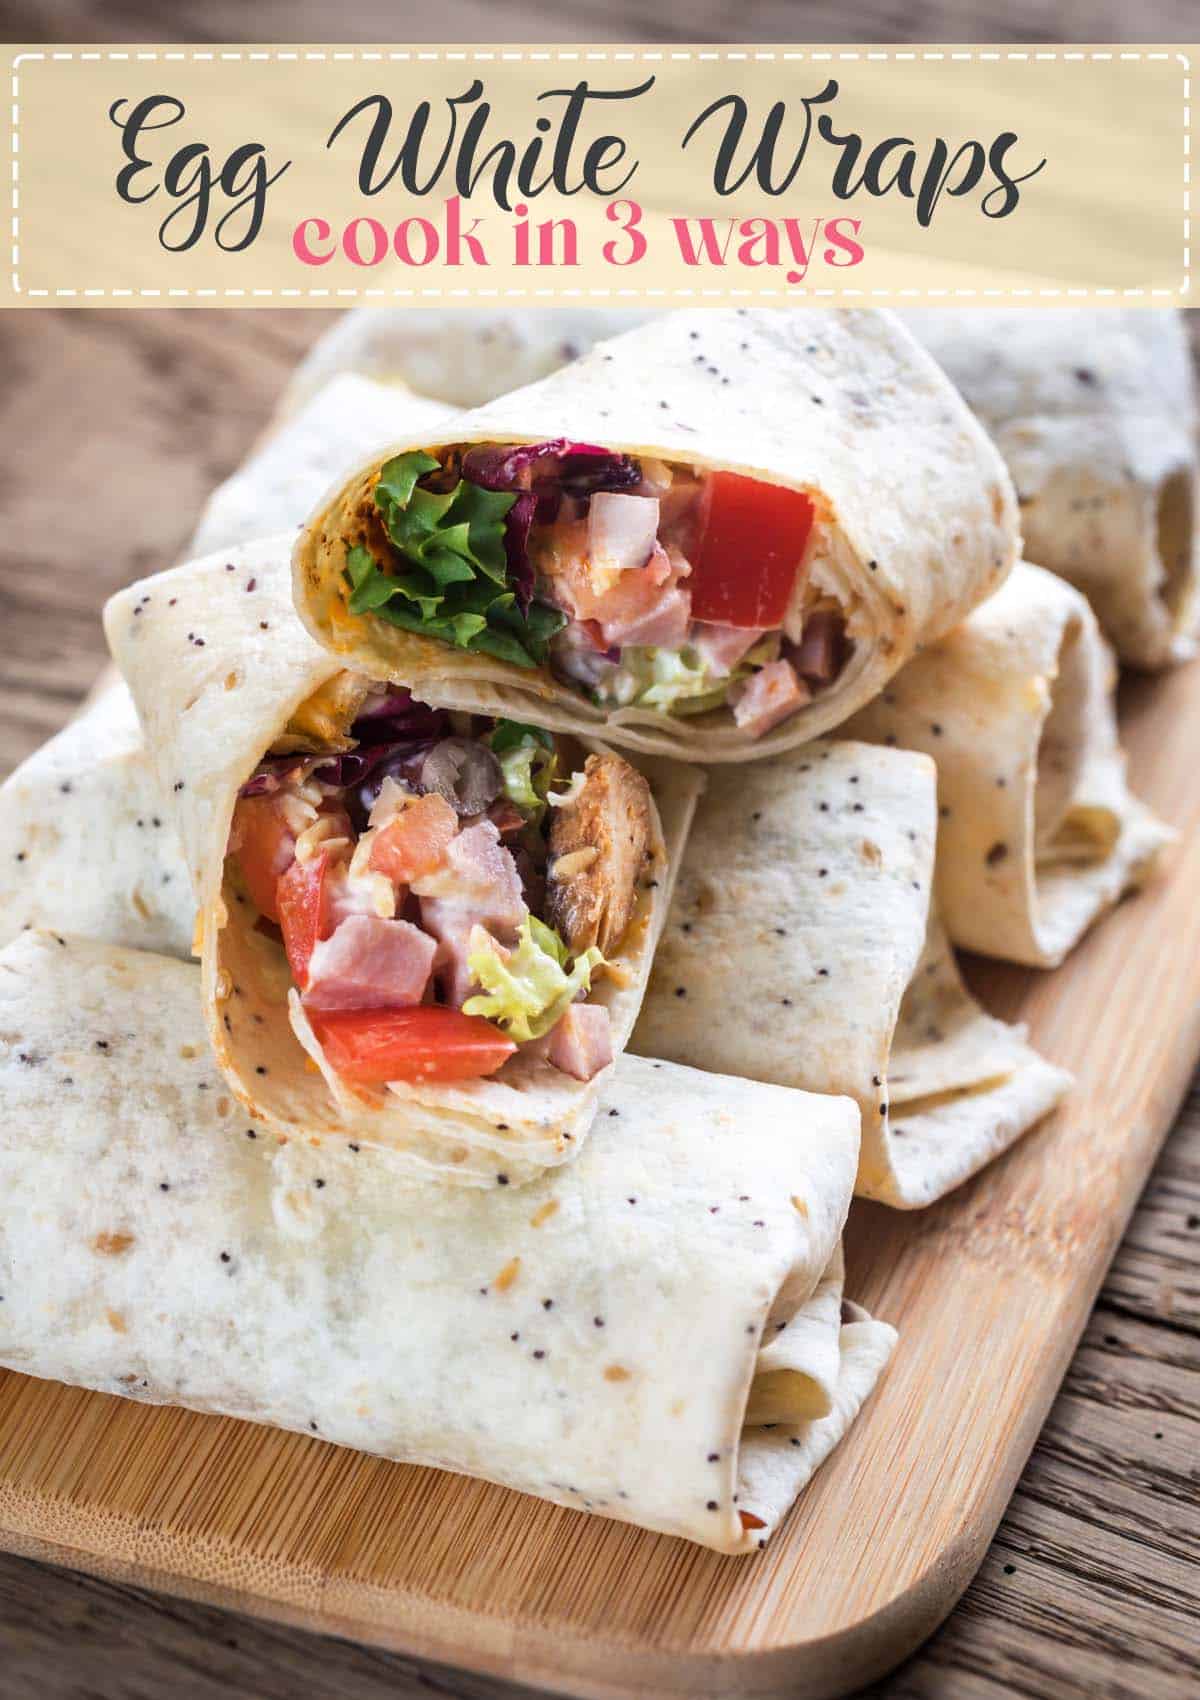 Making egg white wraps is an easy way to enjoy light, healthy breakfast options that will keep you full longer.